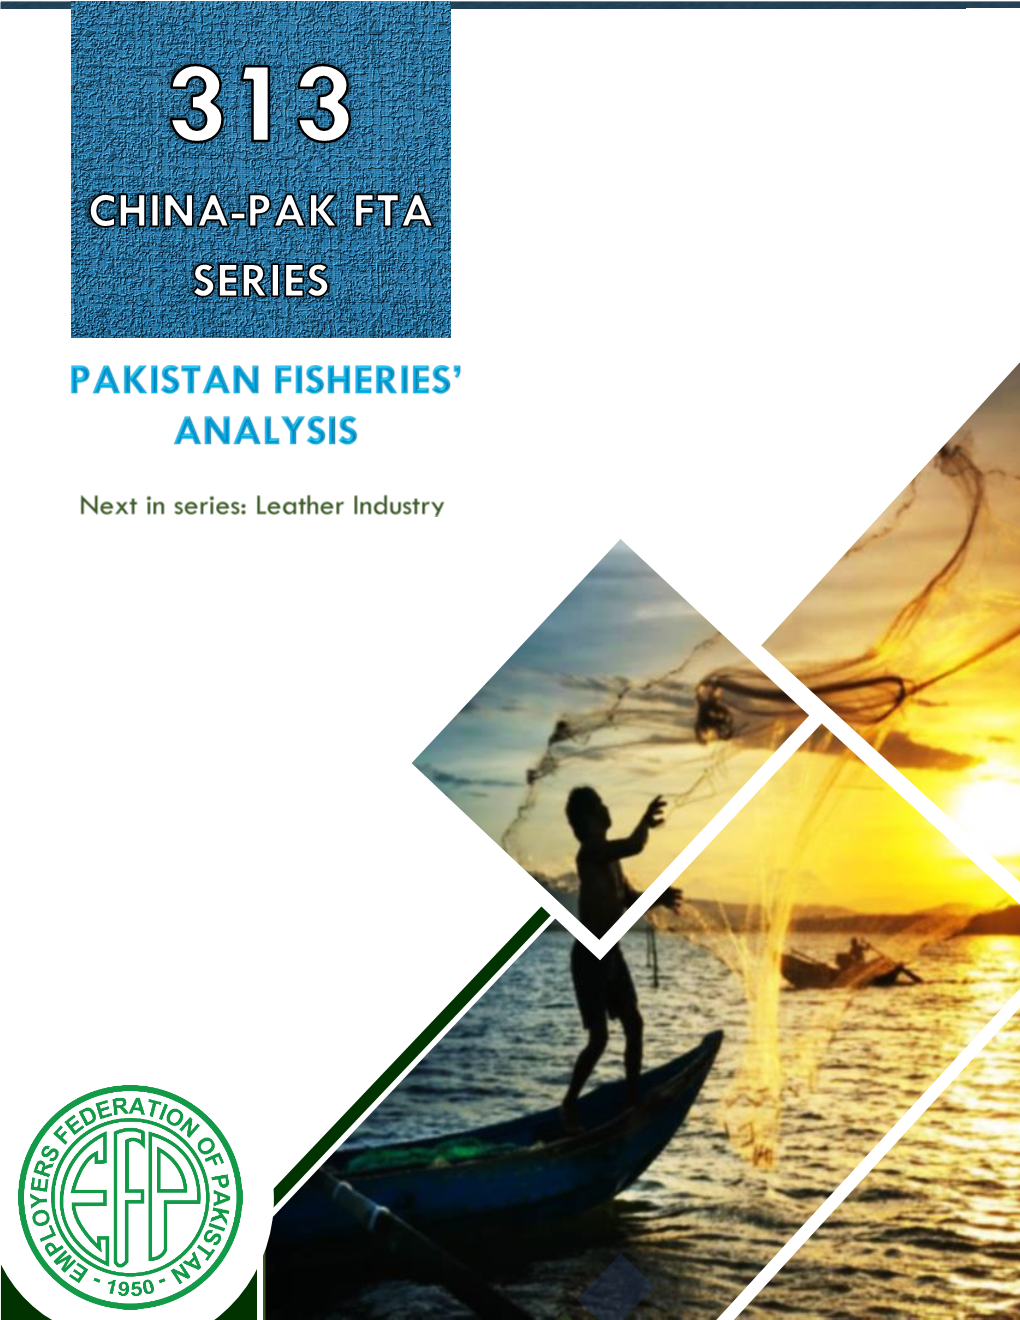 Analysis of Fisheries Sectors